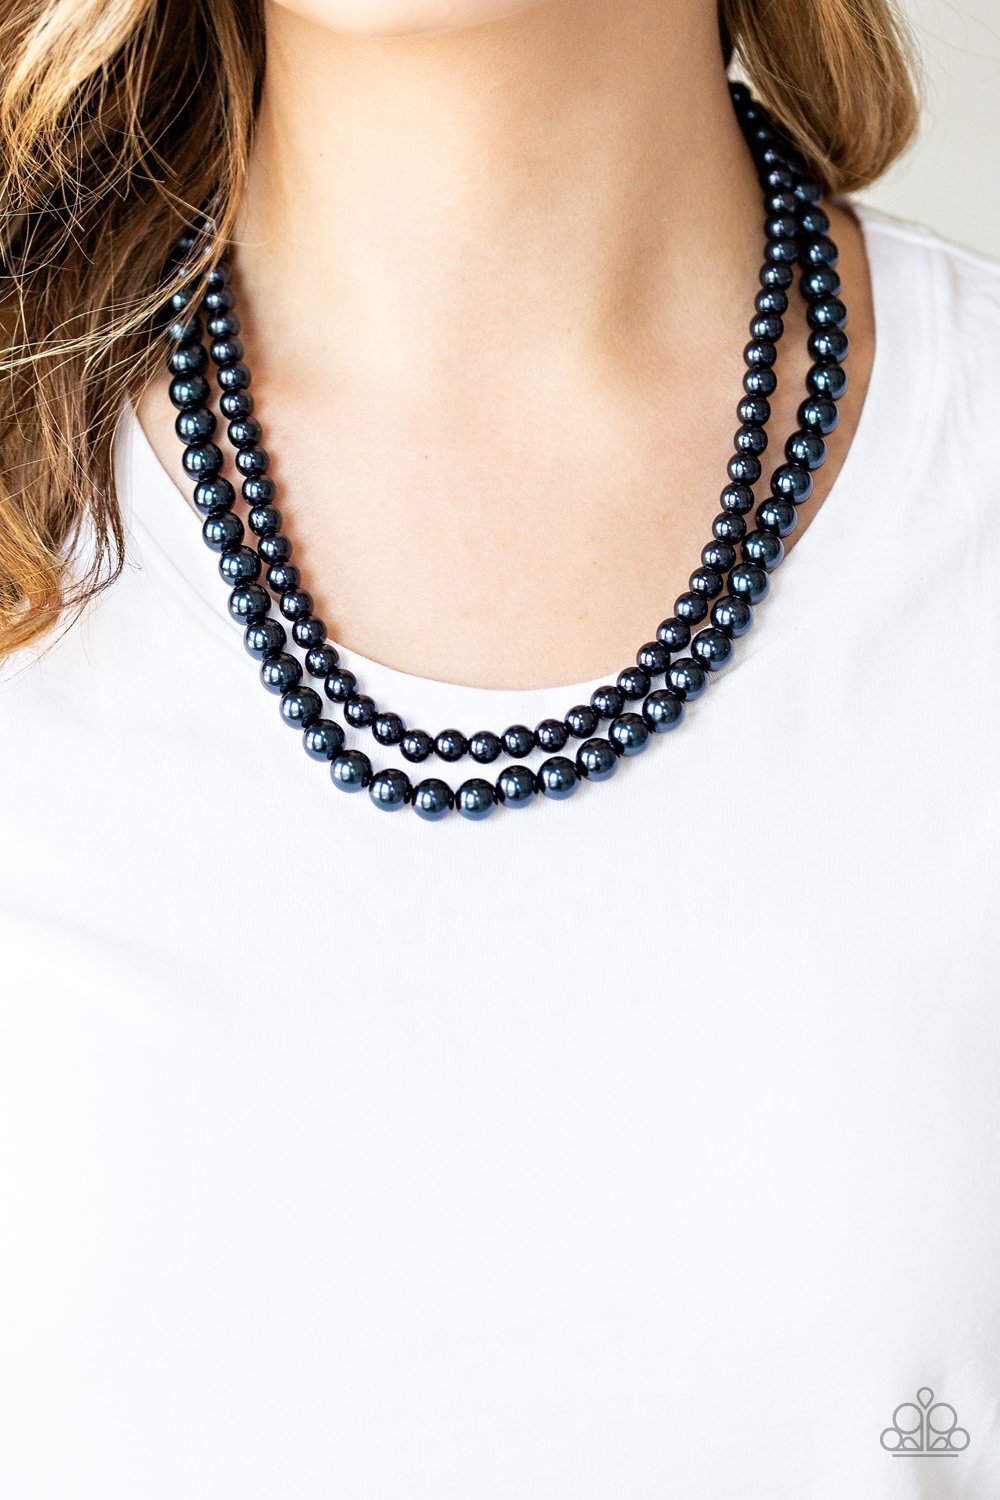 Paparazzi Accessories  - Woman Of The Century - Blue Necklace